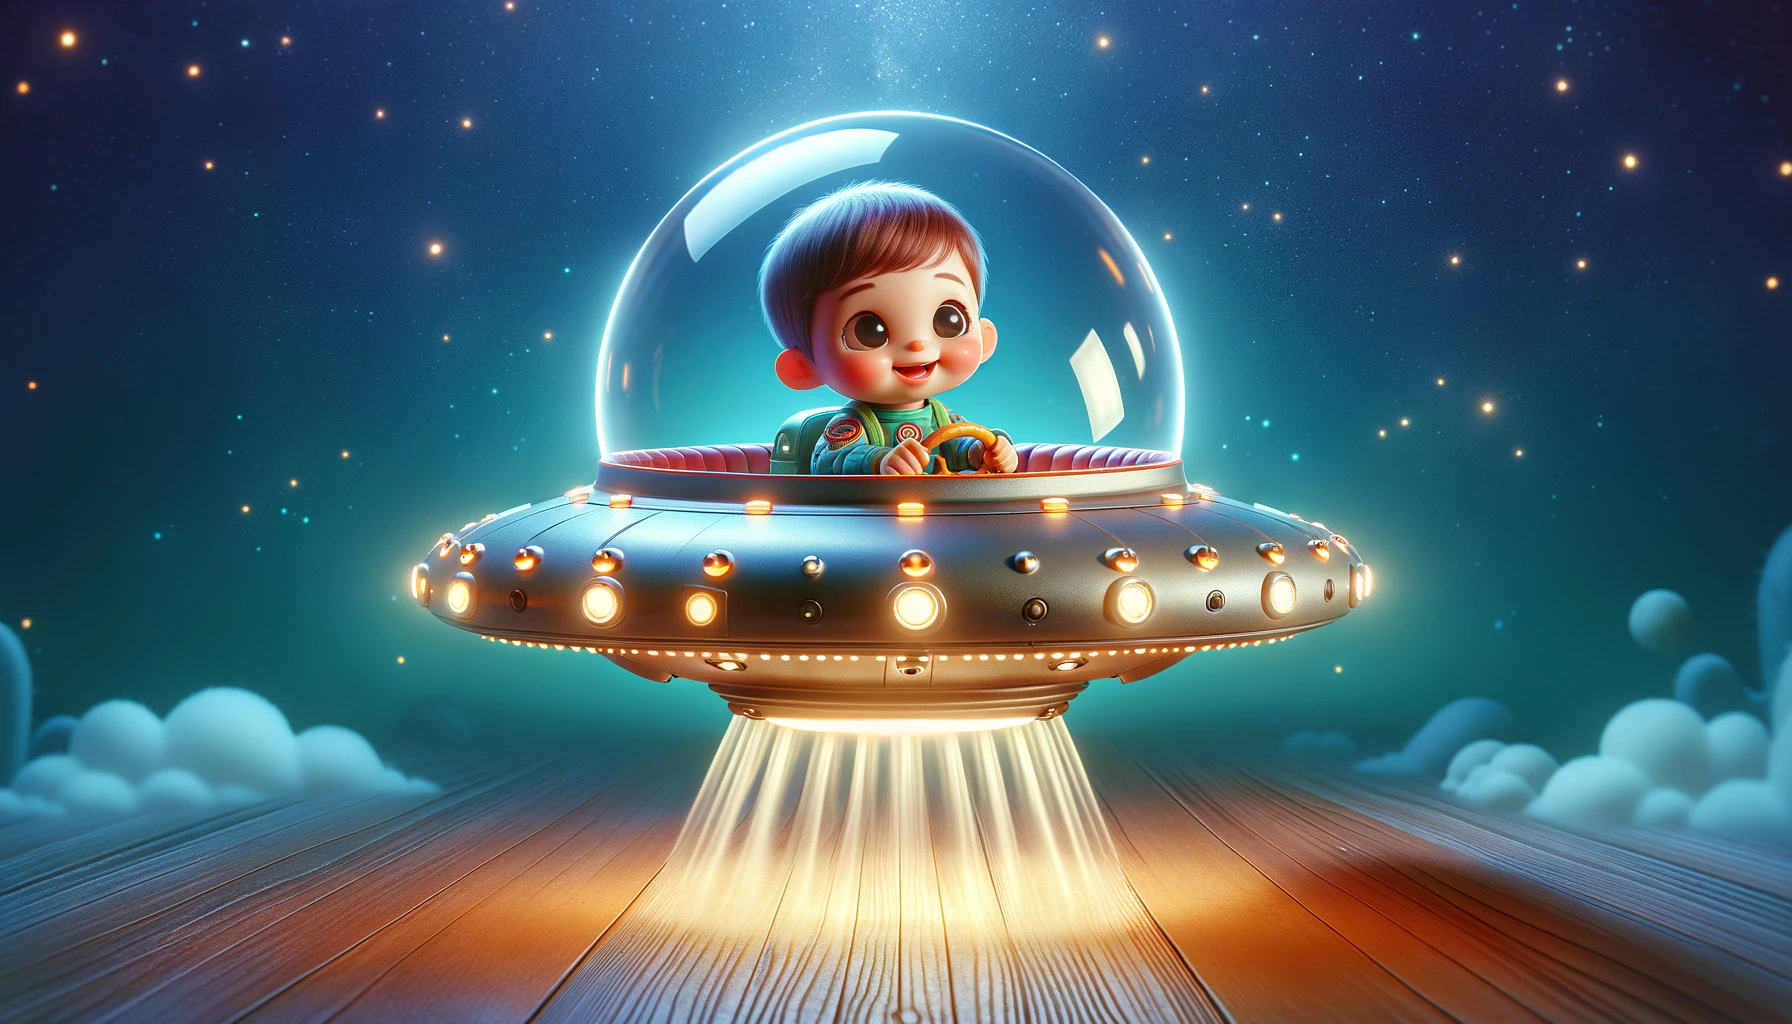 A whimsical scene featuring a small child riding in a UFO. The UFO is sleek and futuristic, with glowing lights and a transparent dome top where the child can be seen. The child appears joyful and curious, peering out with wide eyes. The background depicts a starry night sky, enhancing the feel of a magical, space-themed adventure. The child has a playful outfit, perhaps with elements like a spacesuit or a brightly colored jacket, and the overall atmosphere is one of wonder and excitement.